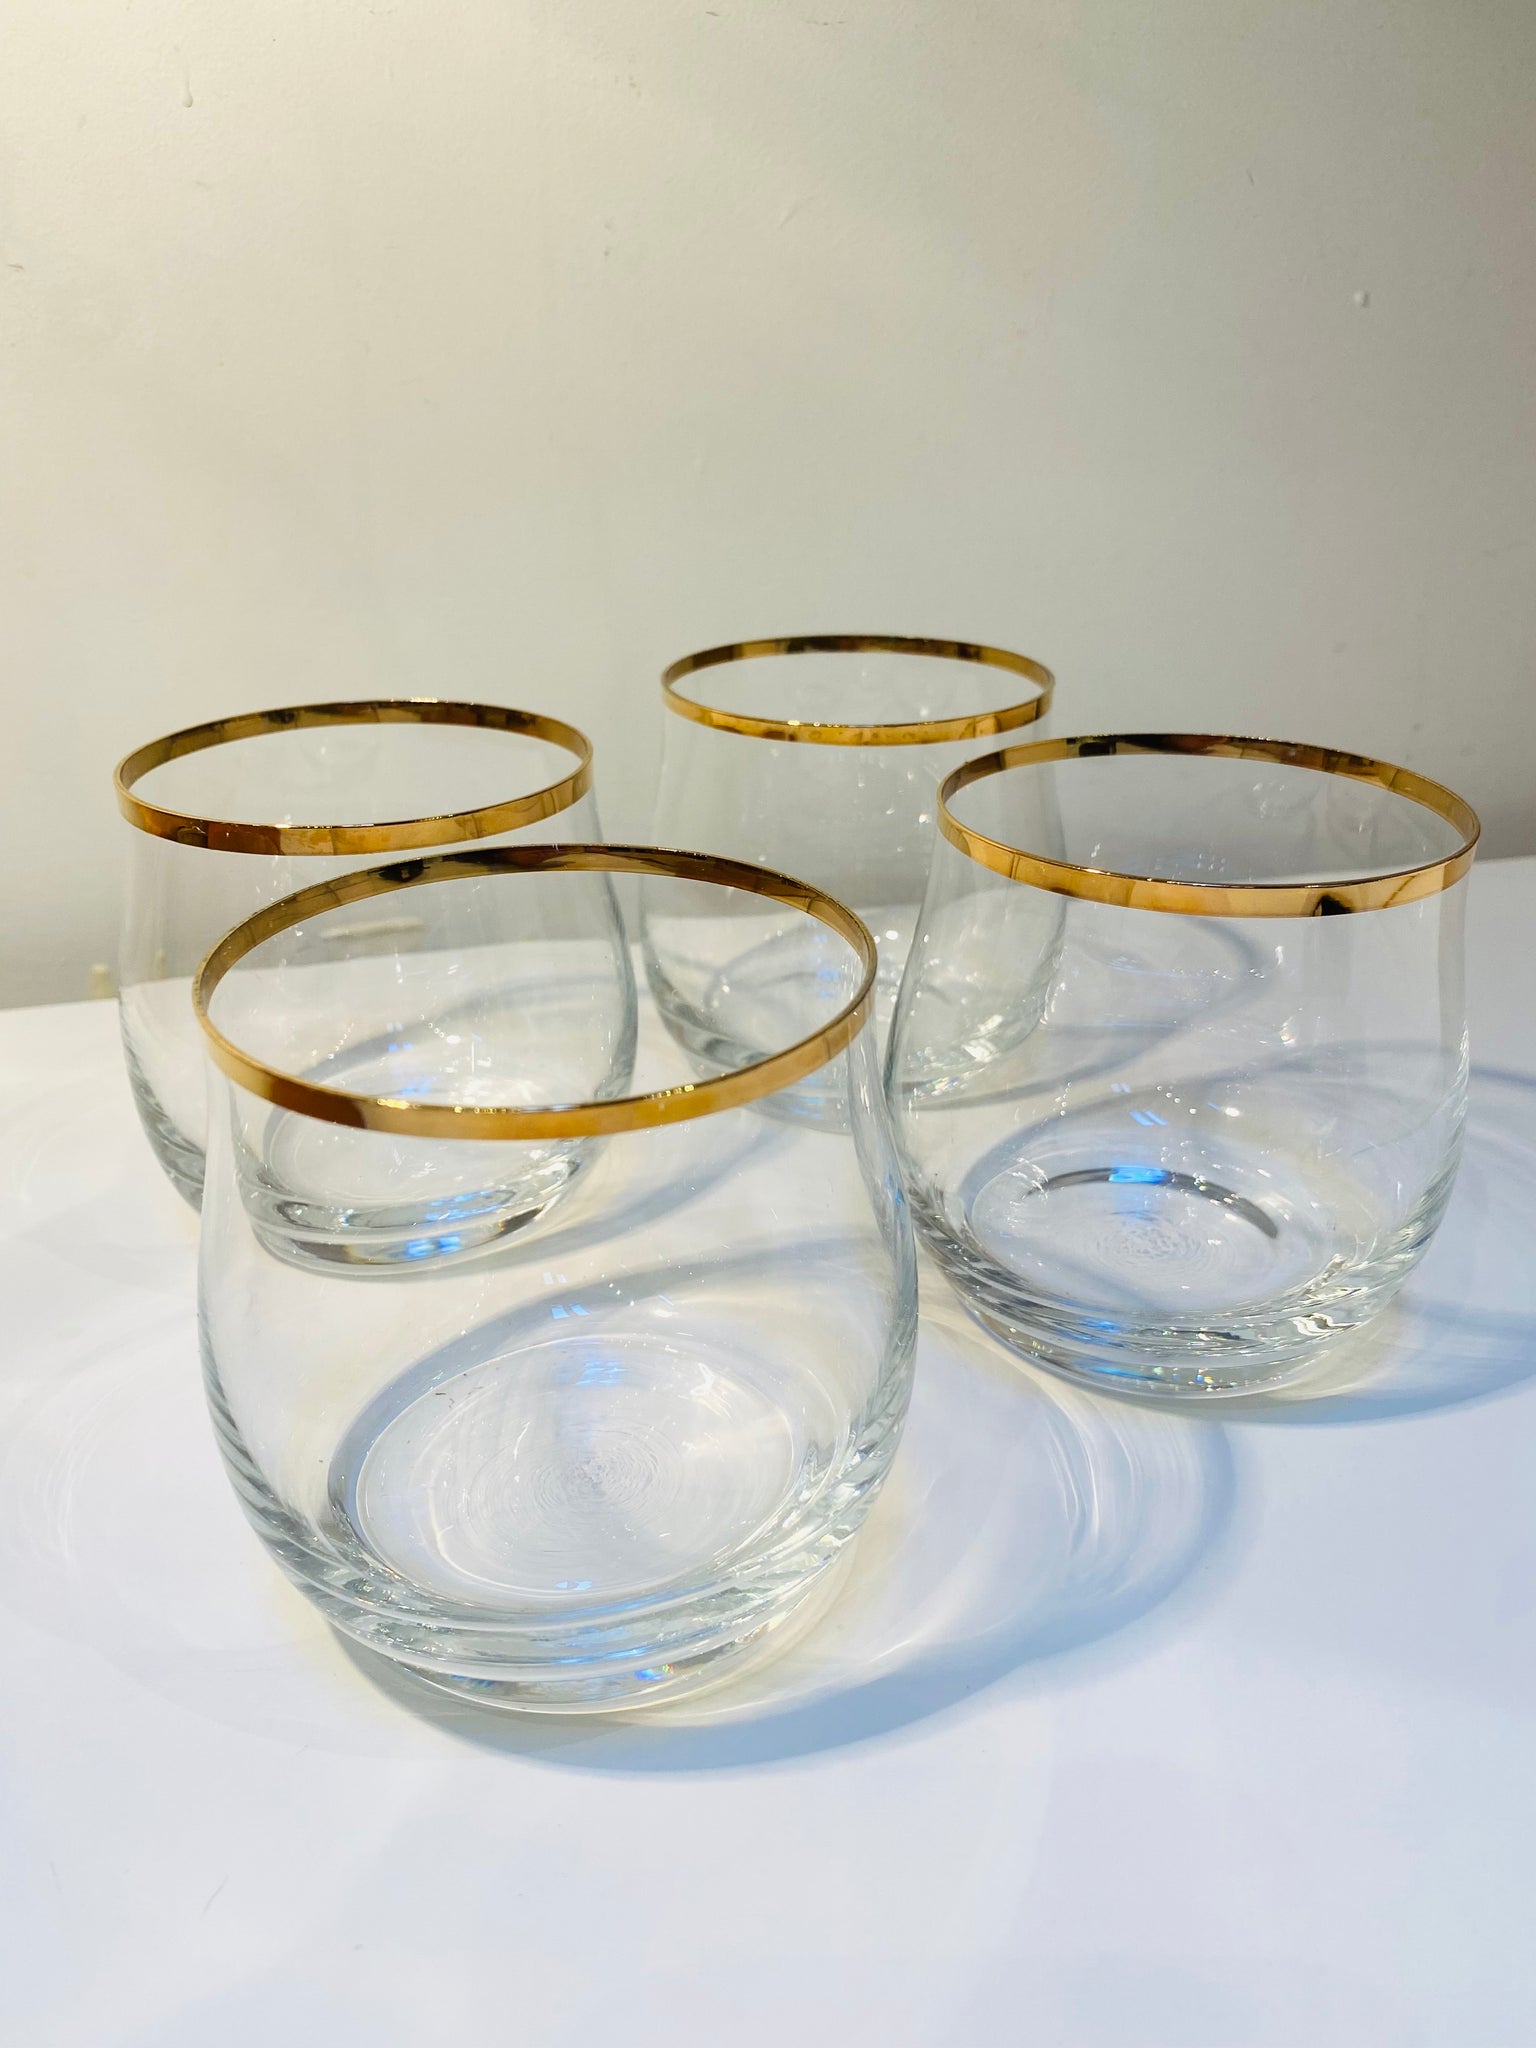 Set of 4 clear glasses tumblers with gold rim detail